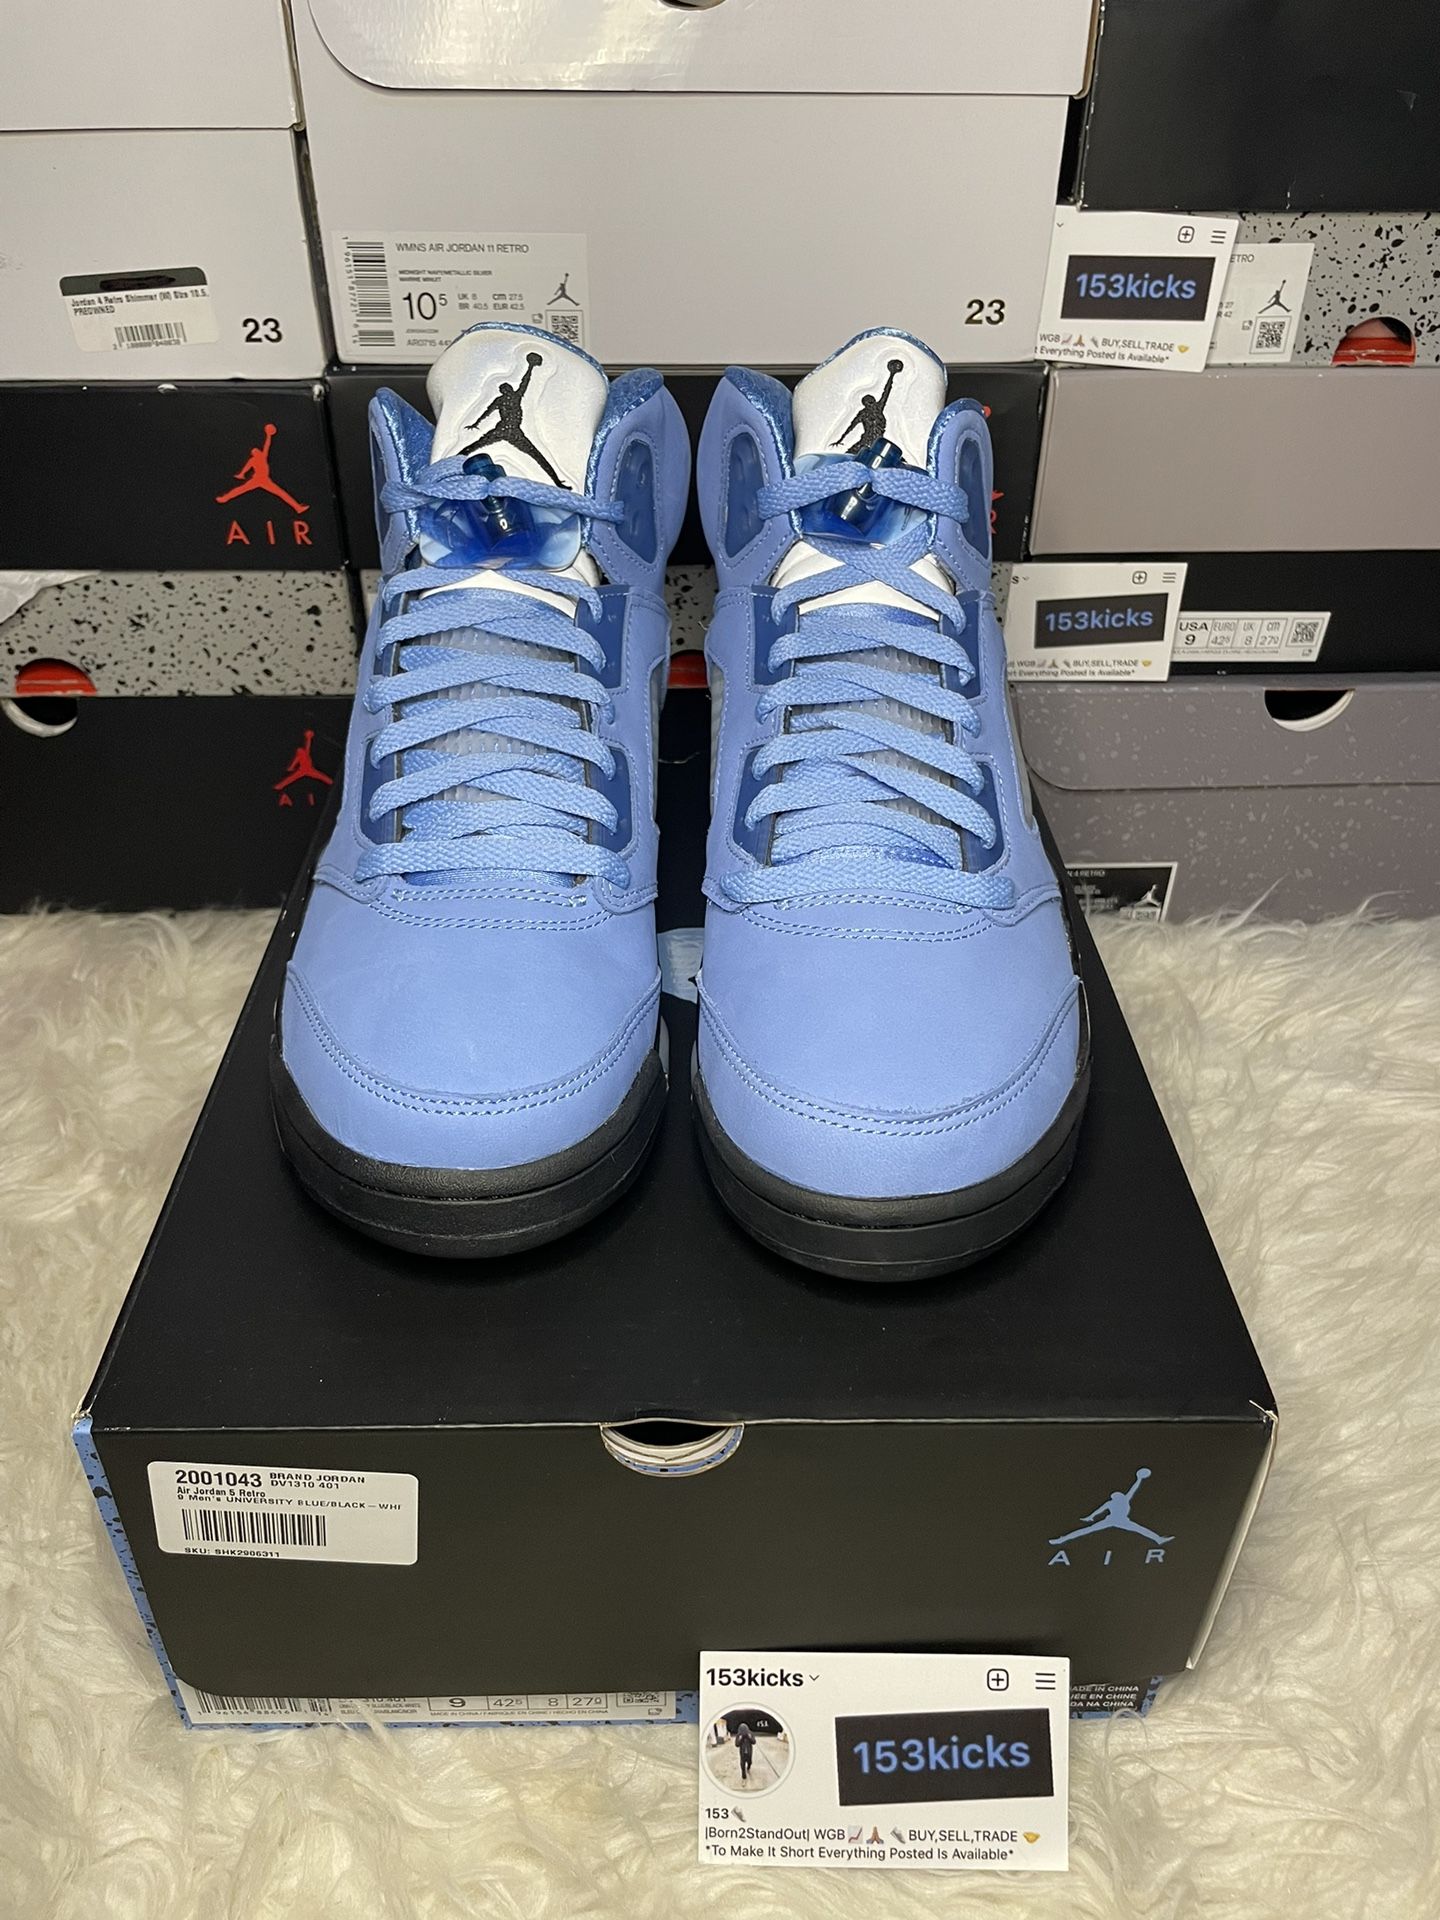 Nike Retro Air Jordan UNC 5s Size 9 Mens & 10.5 Womens Asking 310$ Brand New 100% Authentic With OG All